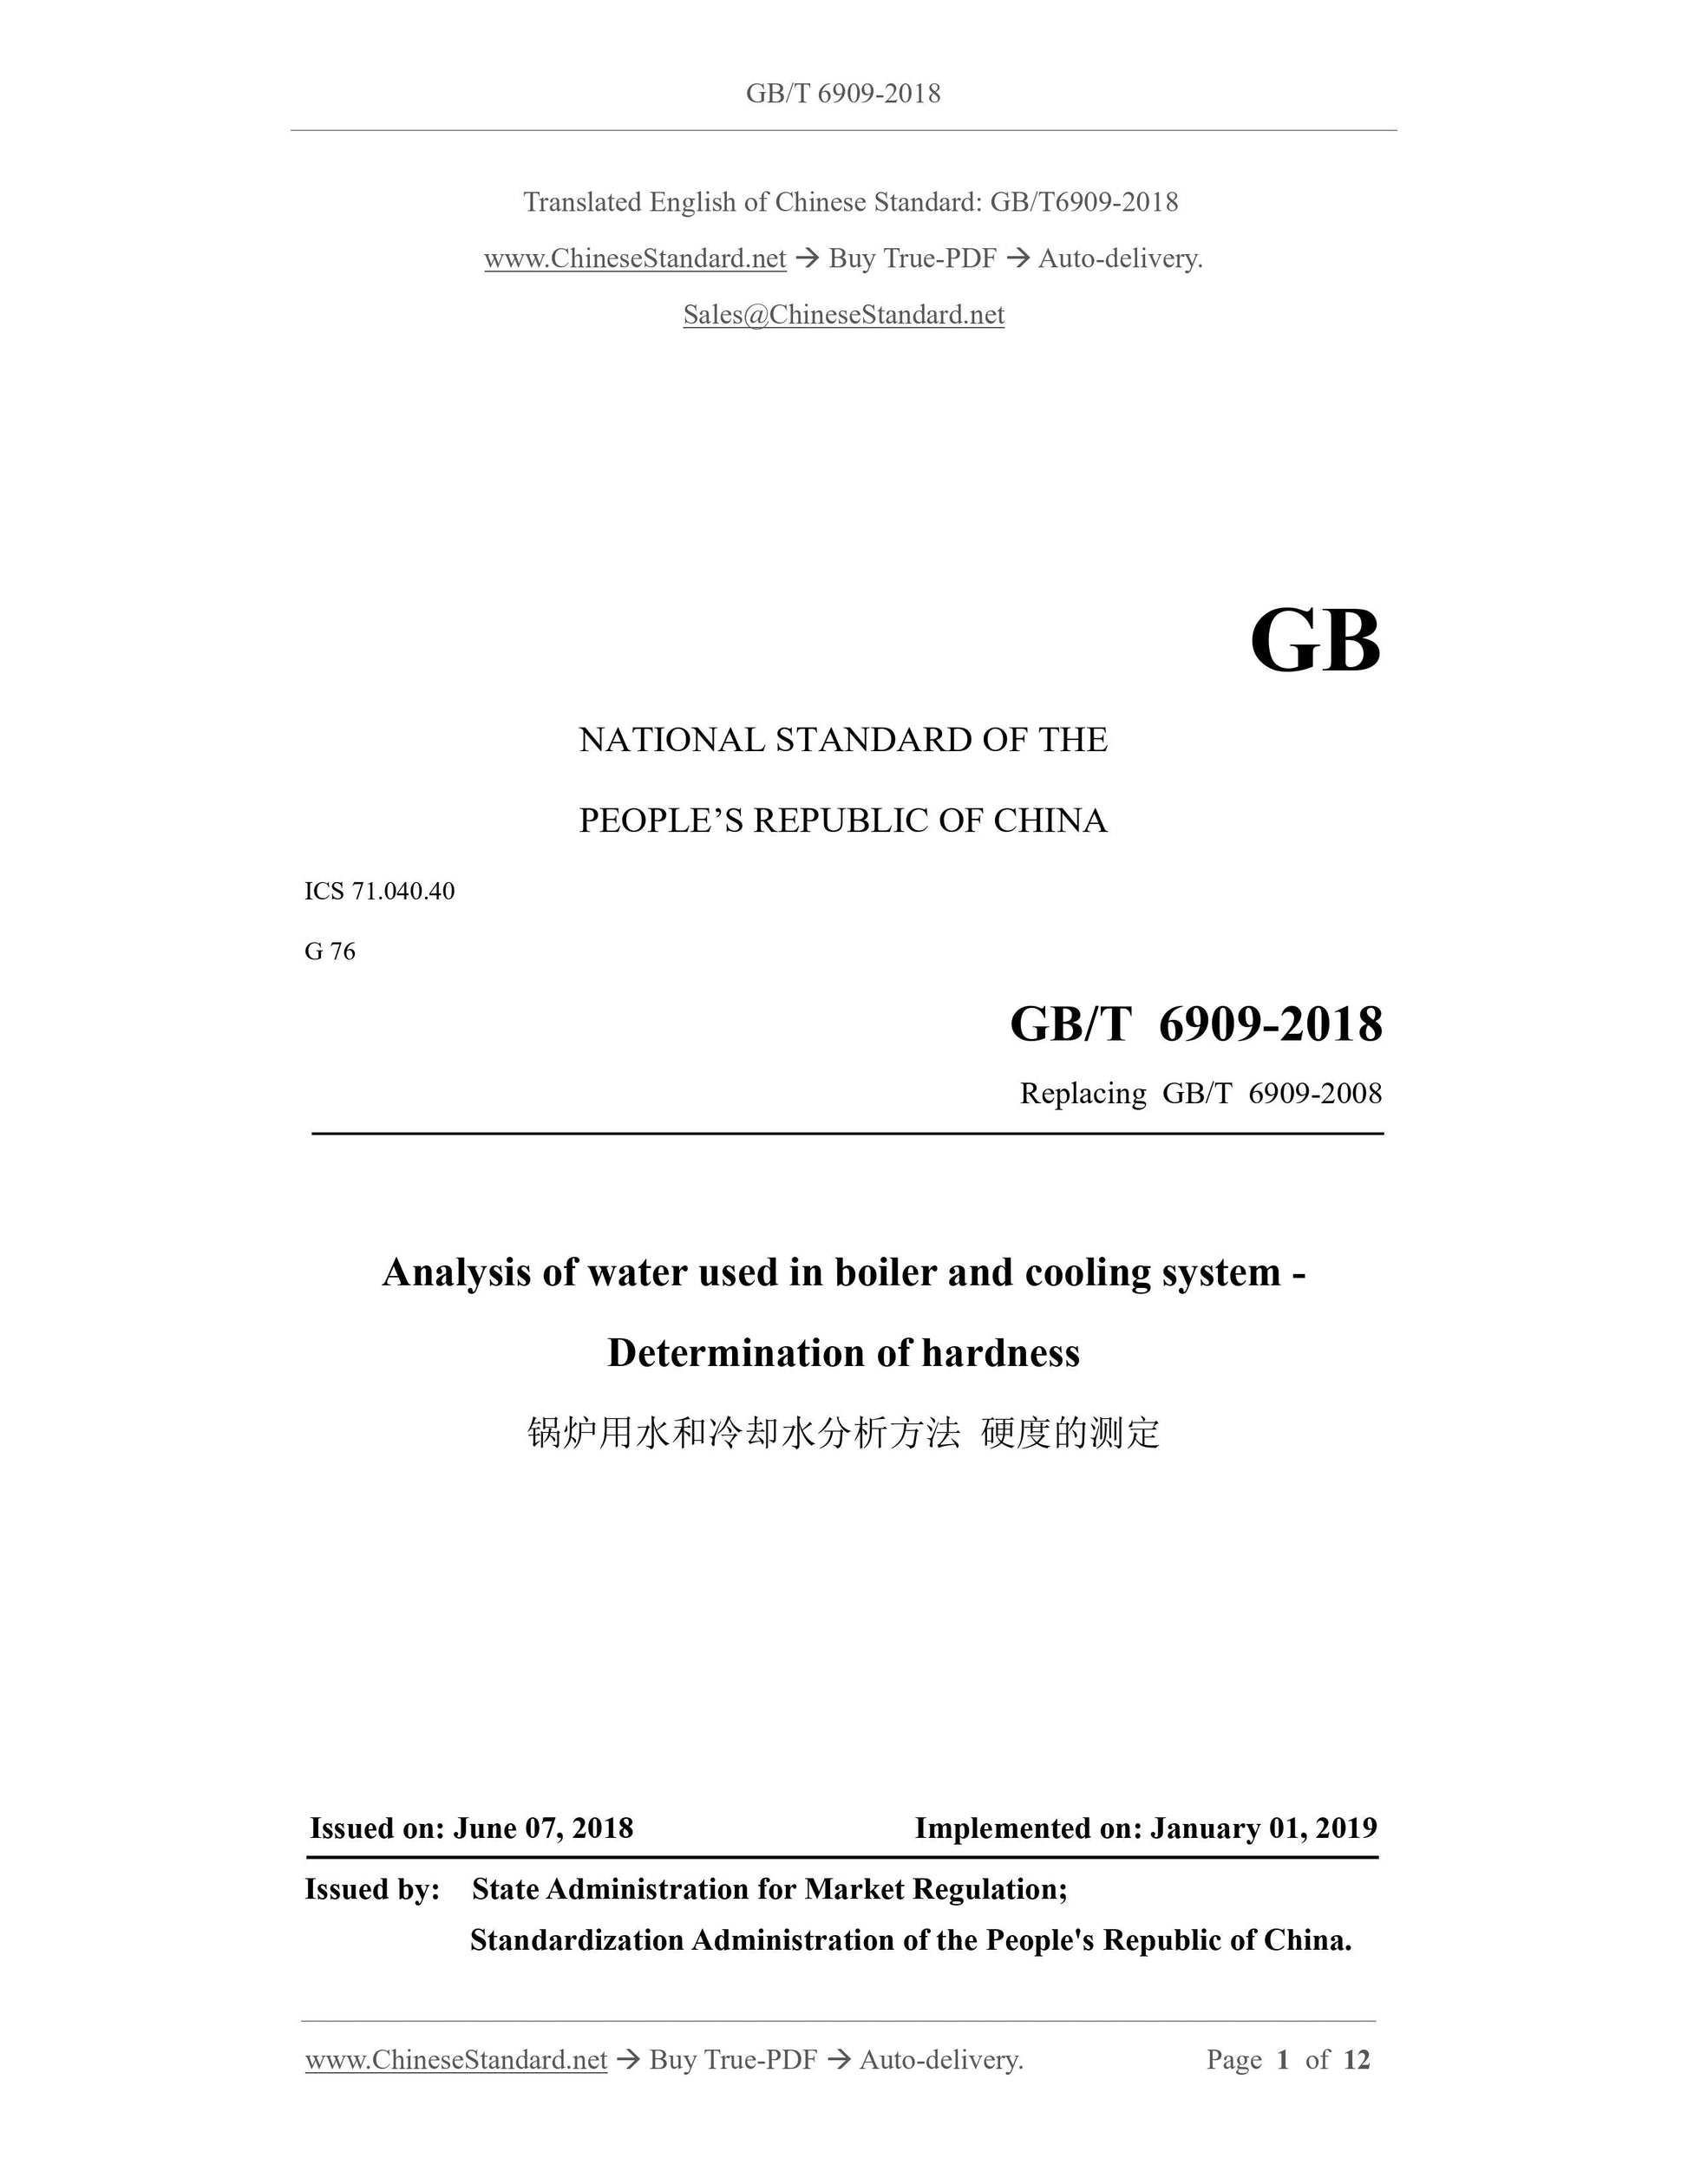 GB/T 6909-2018 Page 1